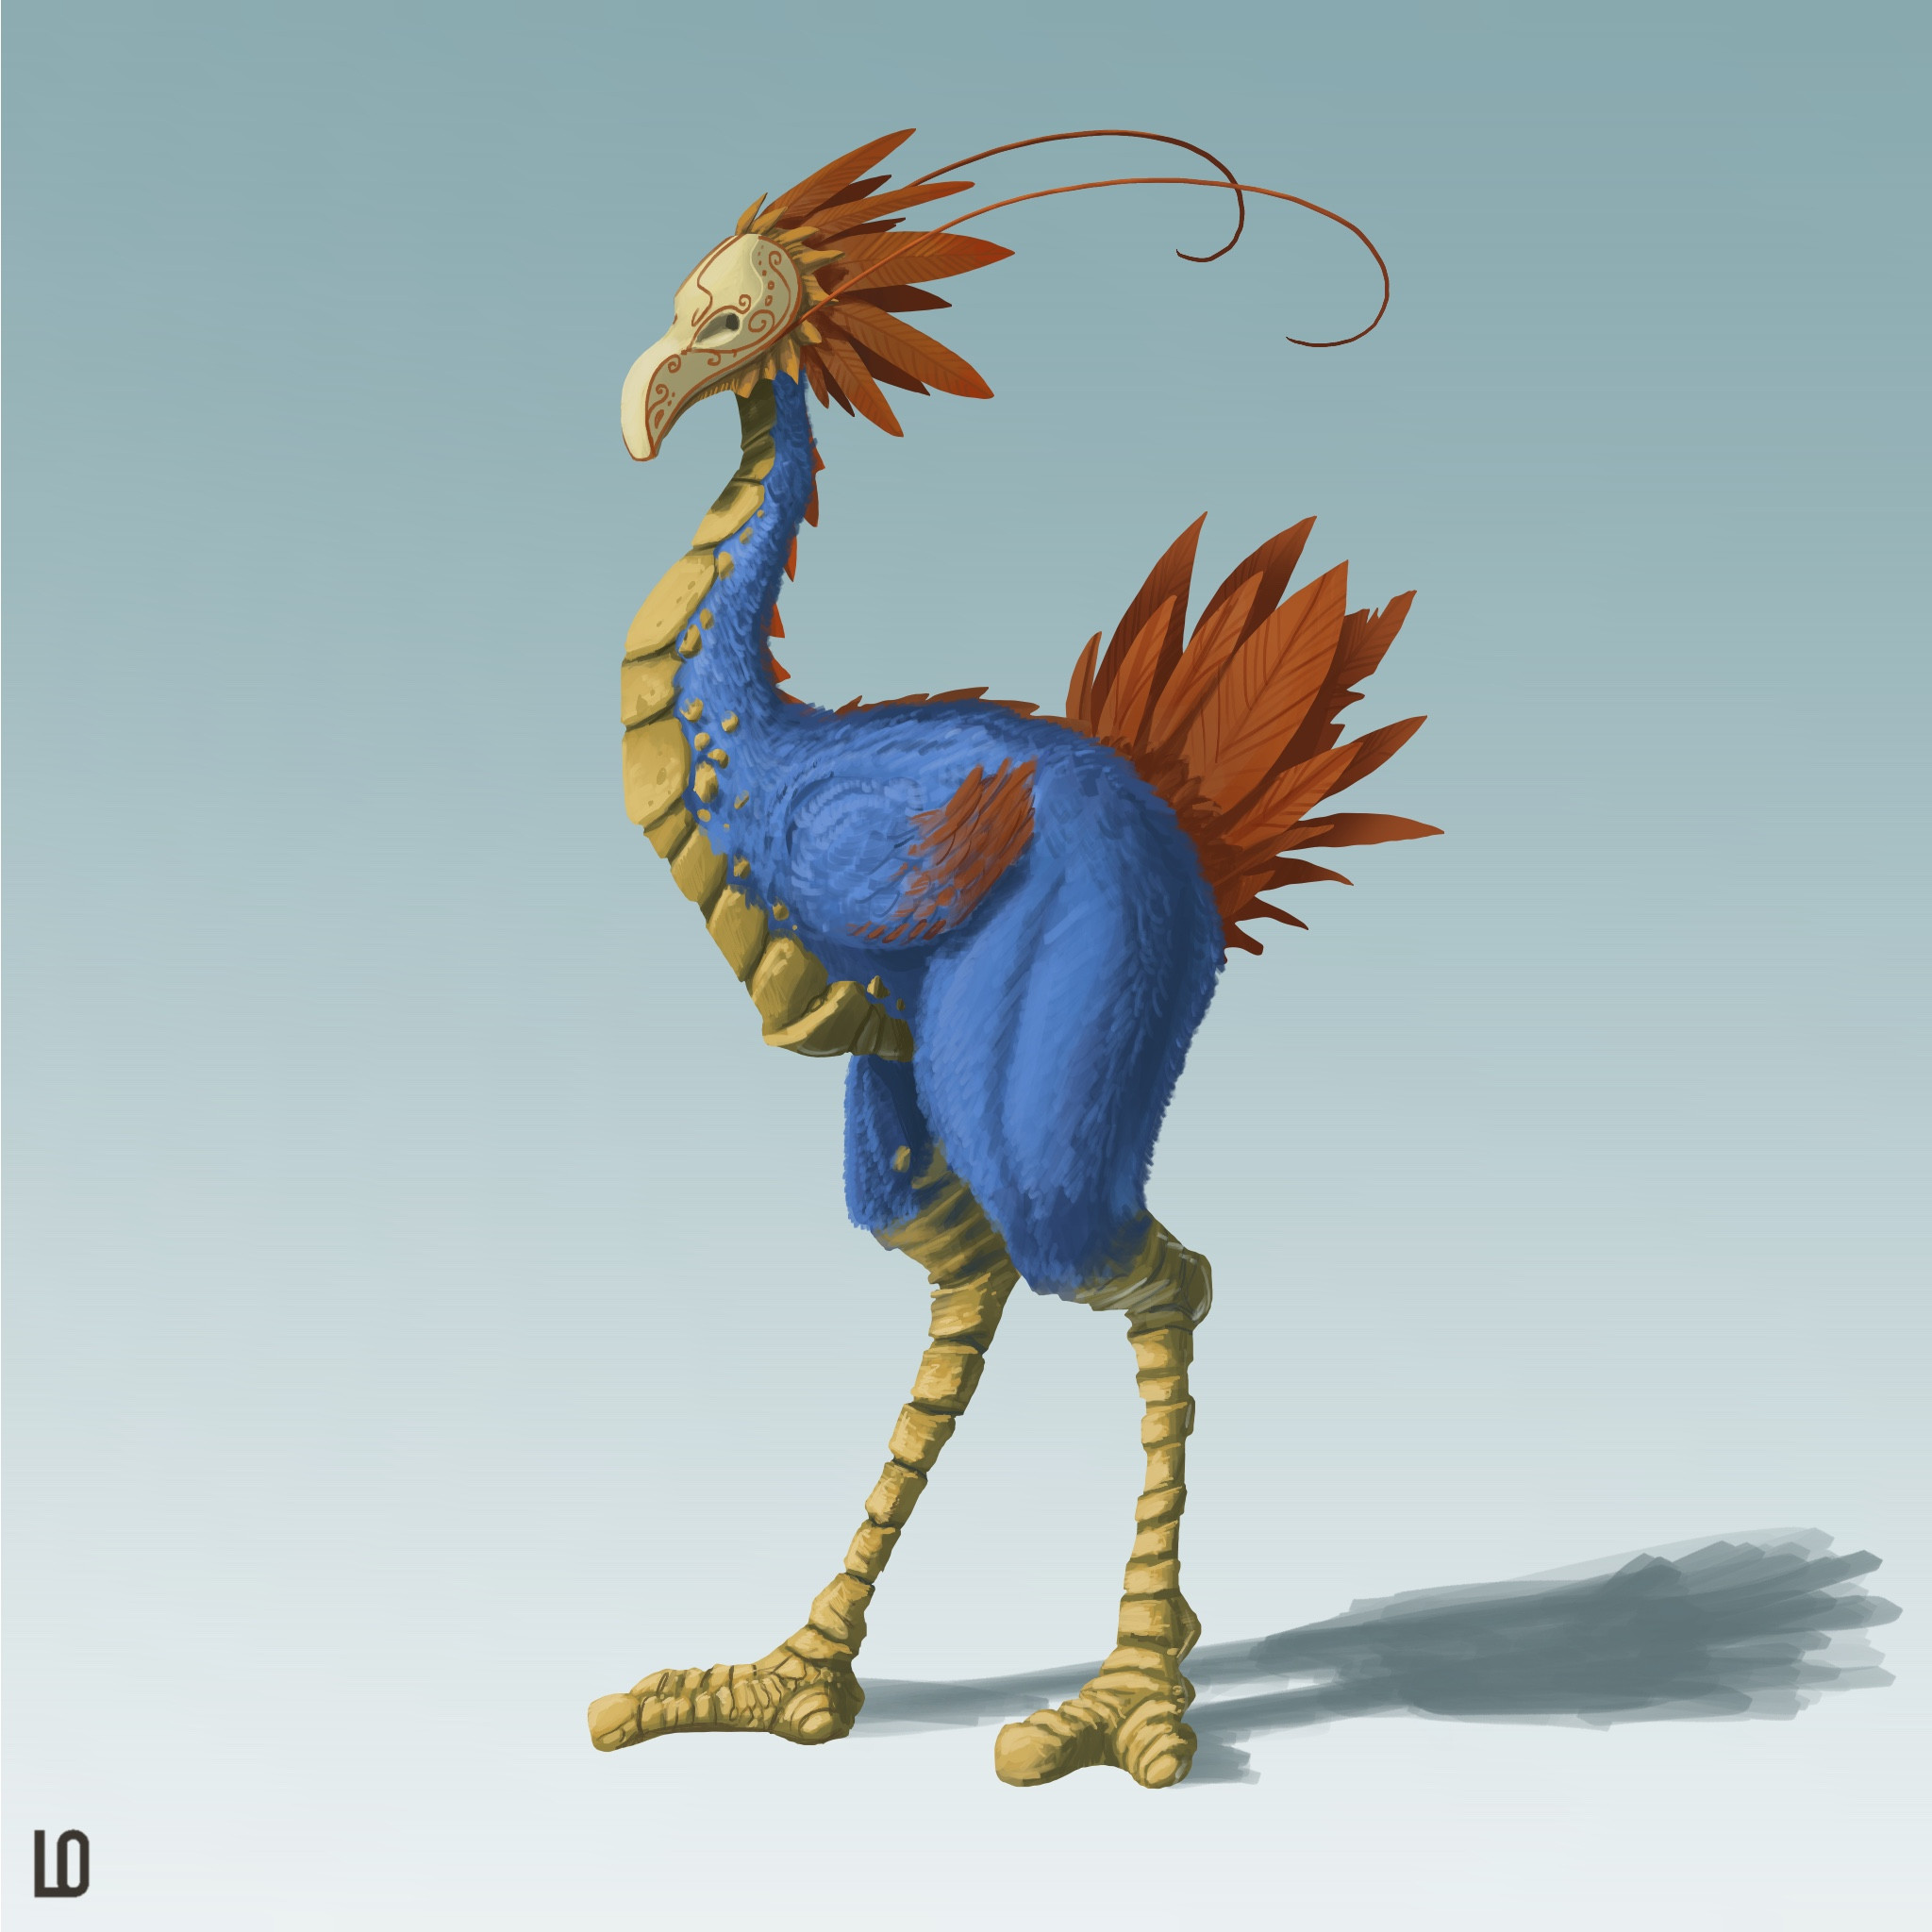 The carnivalesque ostrich